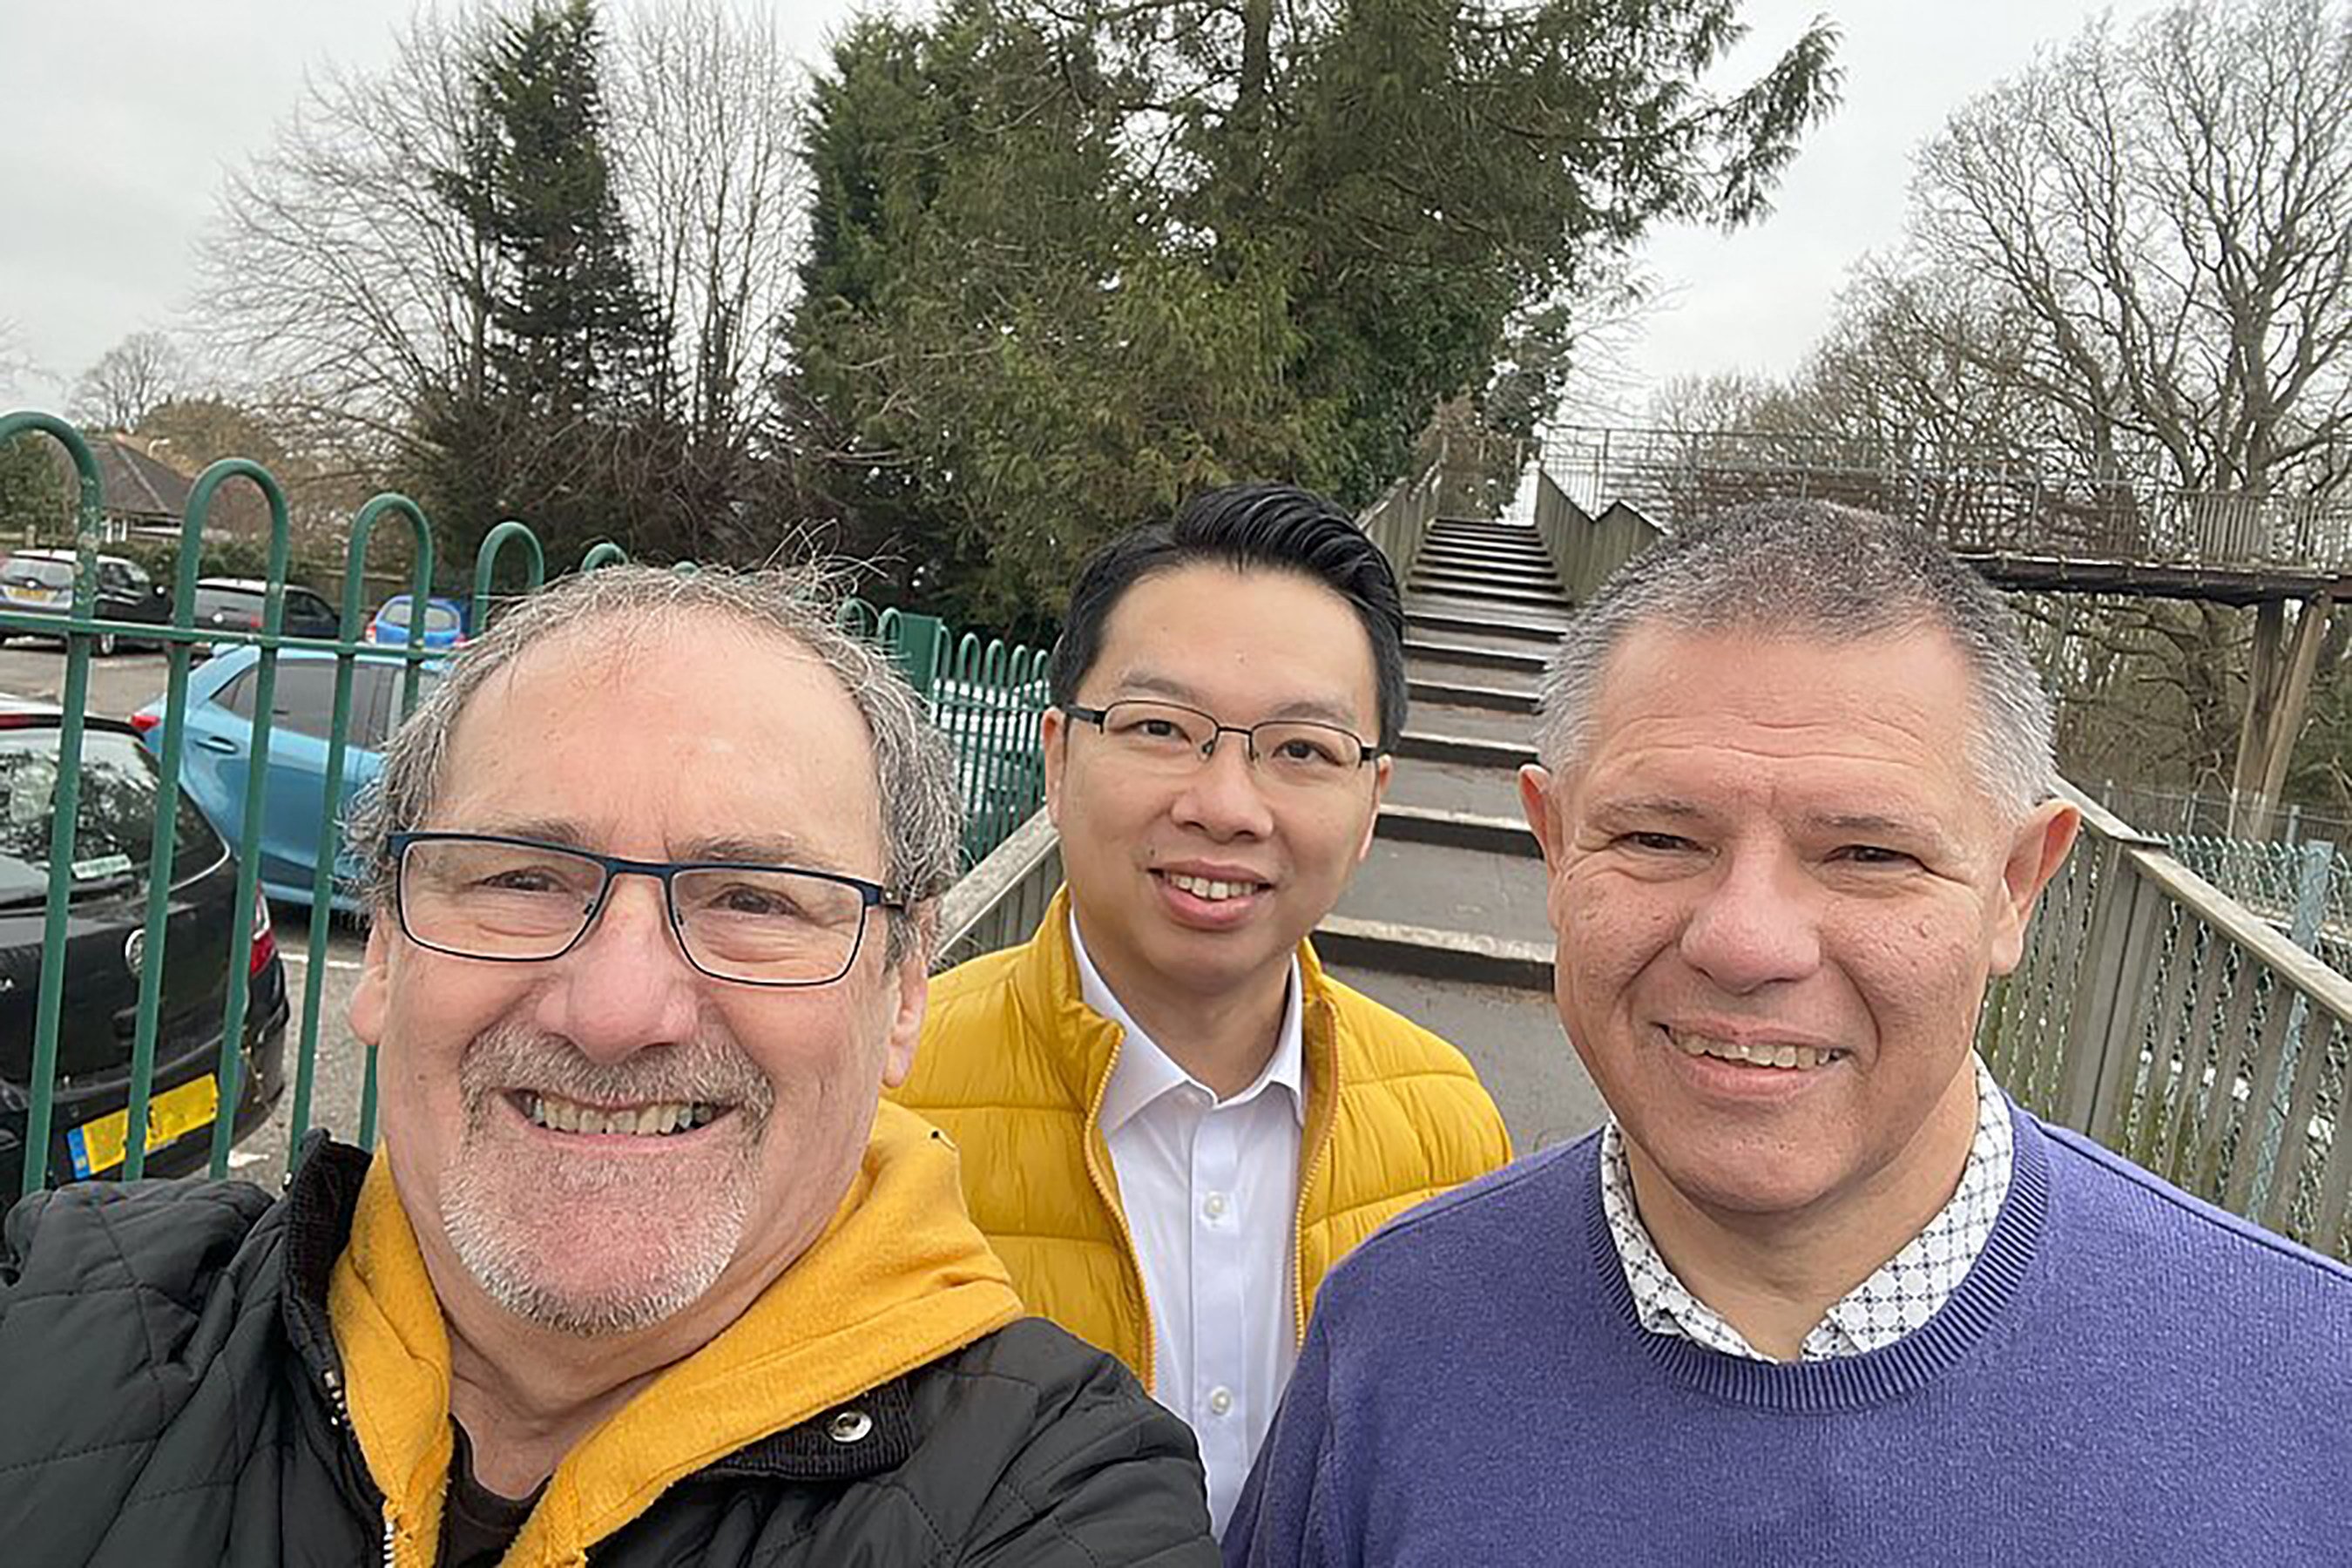 Liberal Democrat candidates for the Maiden Erlegh & Whitegates ward: Stephen Newton (right), Andy Ng (centre) and Mike Smith. Ng announced his victory on Friday in the Wokingham election. Photo: Wokingham Liberal Democrat